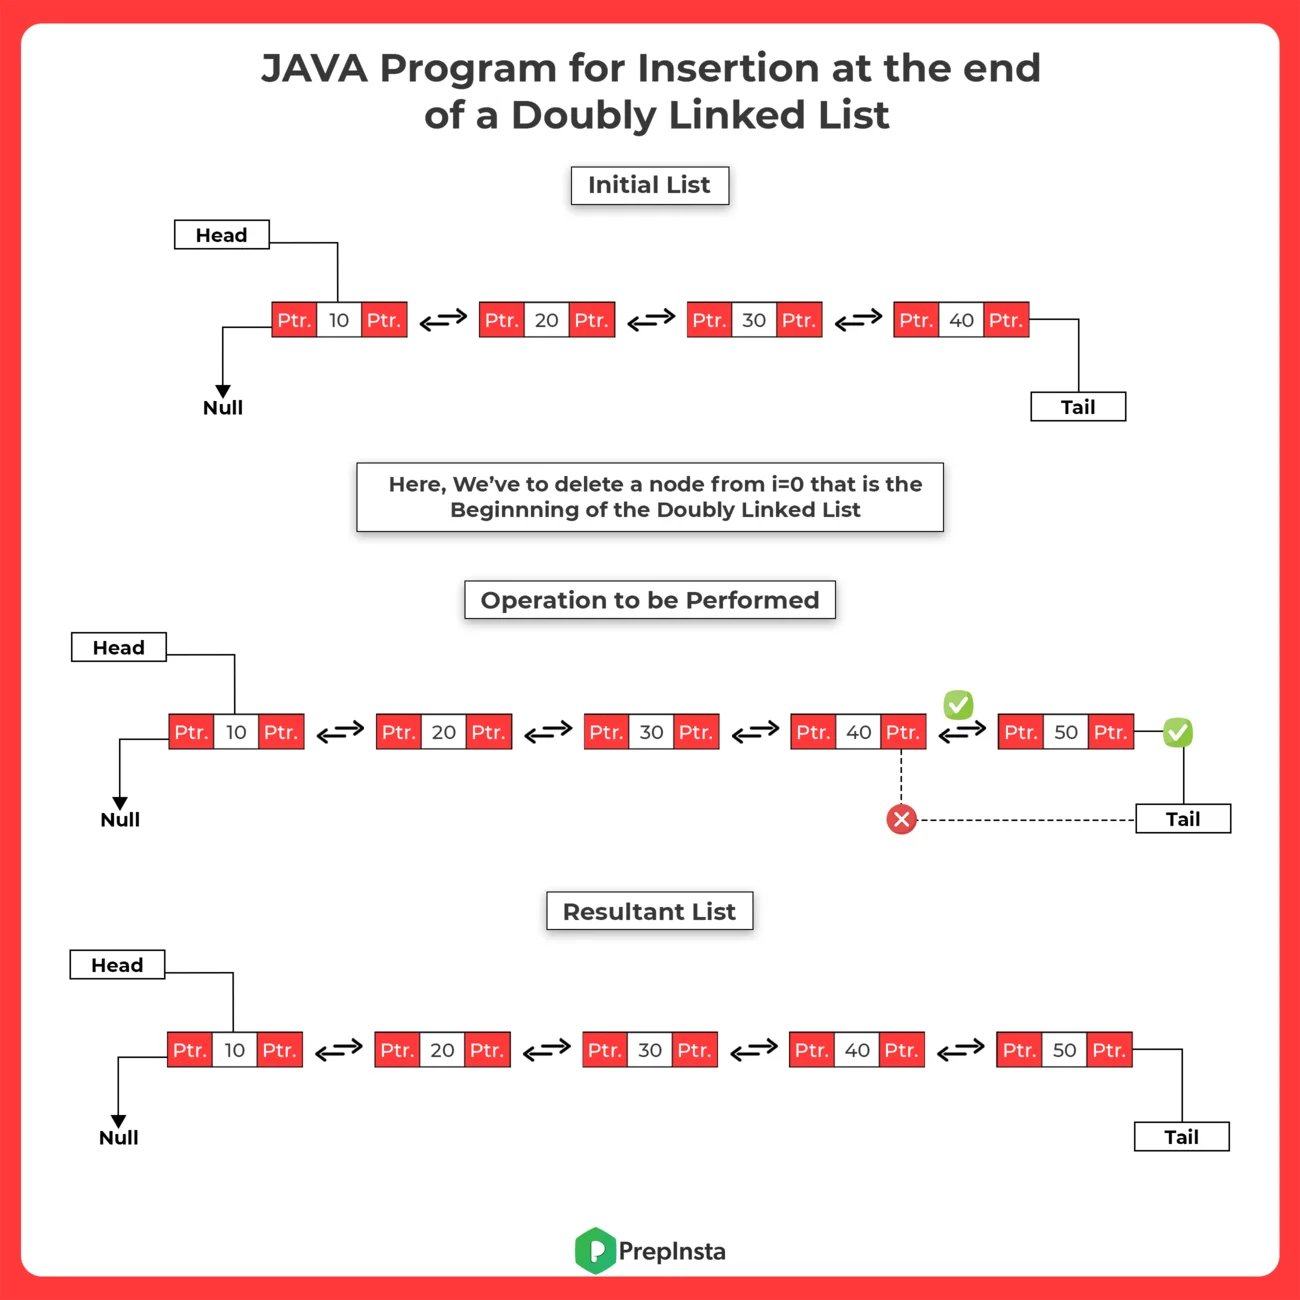 JAVA Program for Insertion at the end in a Doubly Linked List